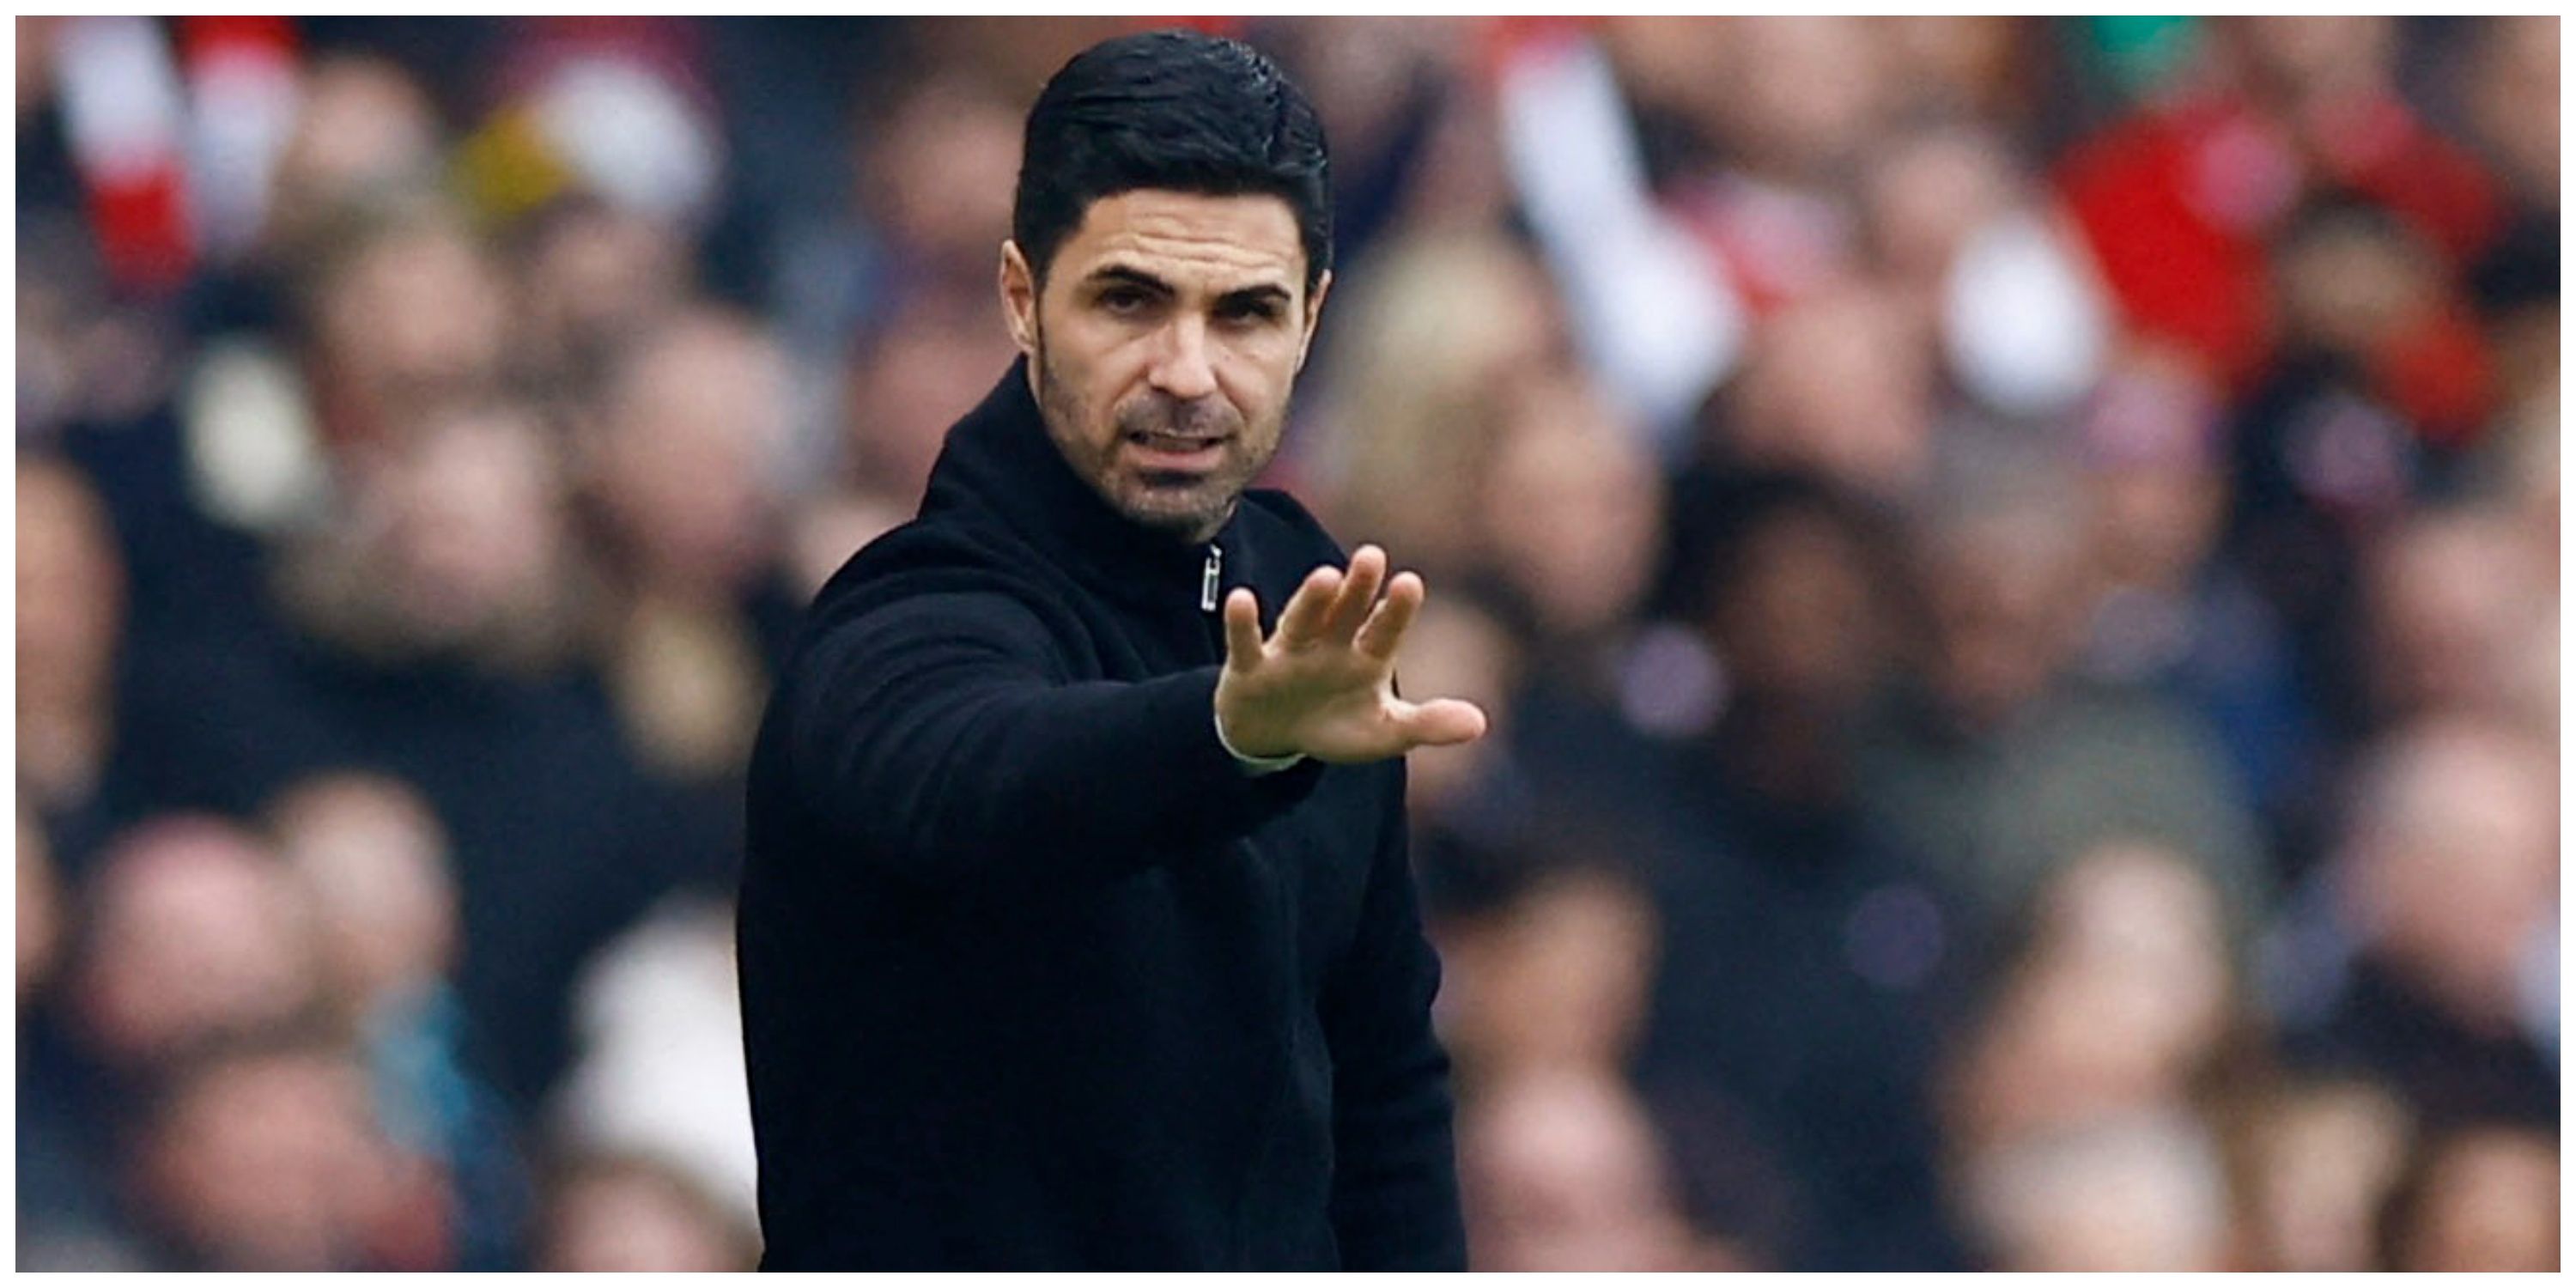 Arsenal manager Mikel Arteta with outstretched arm